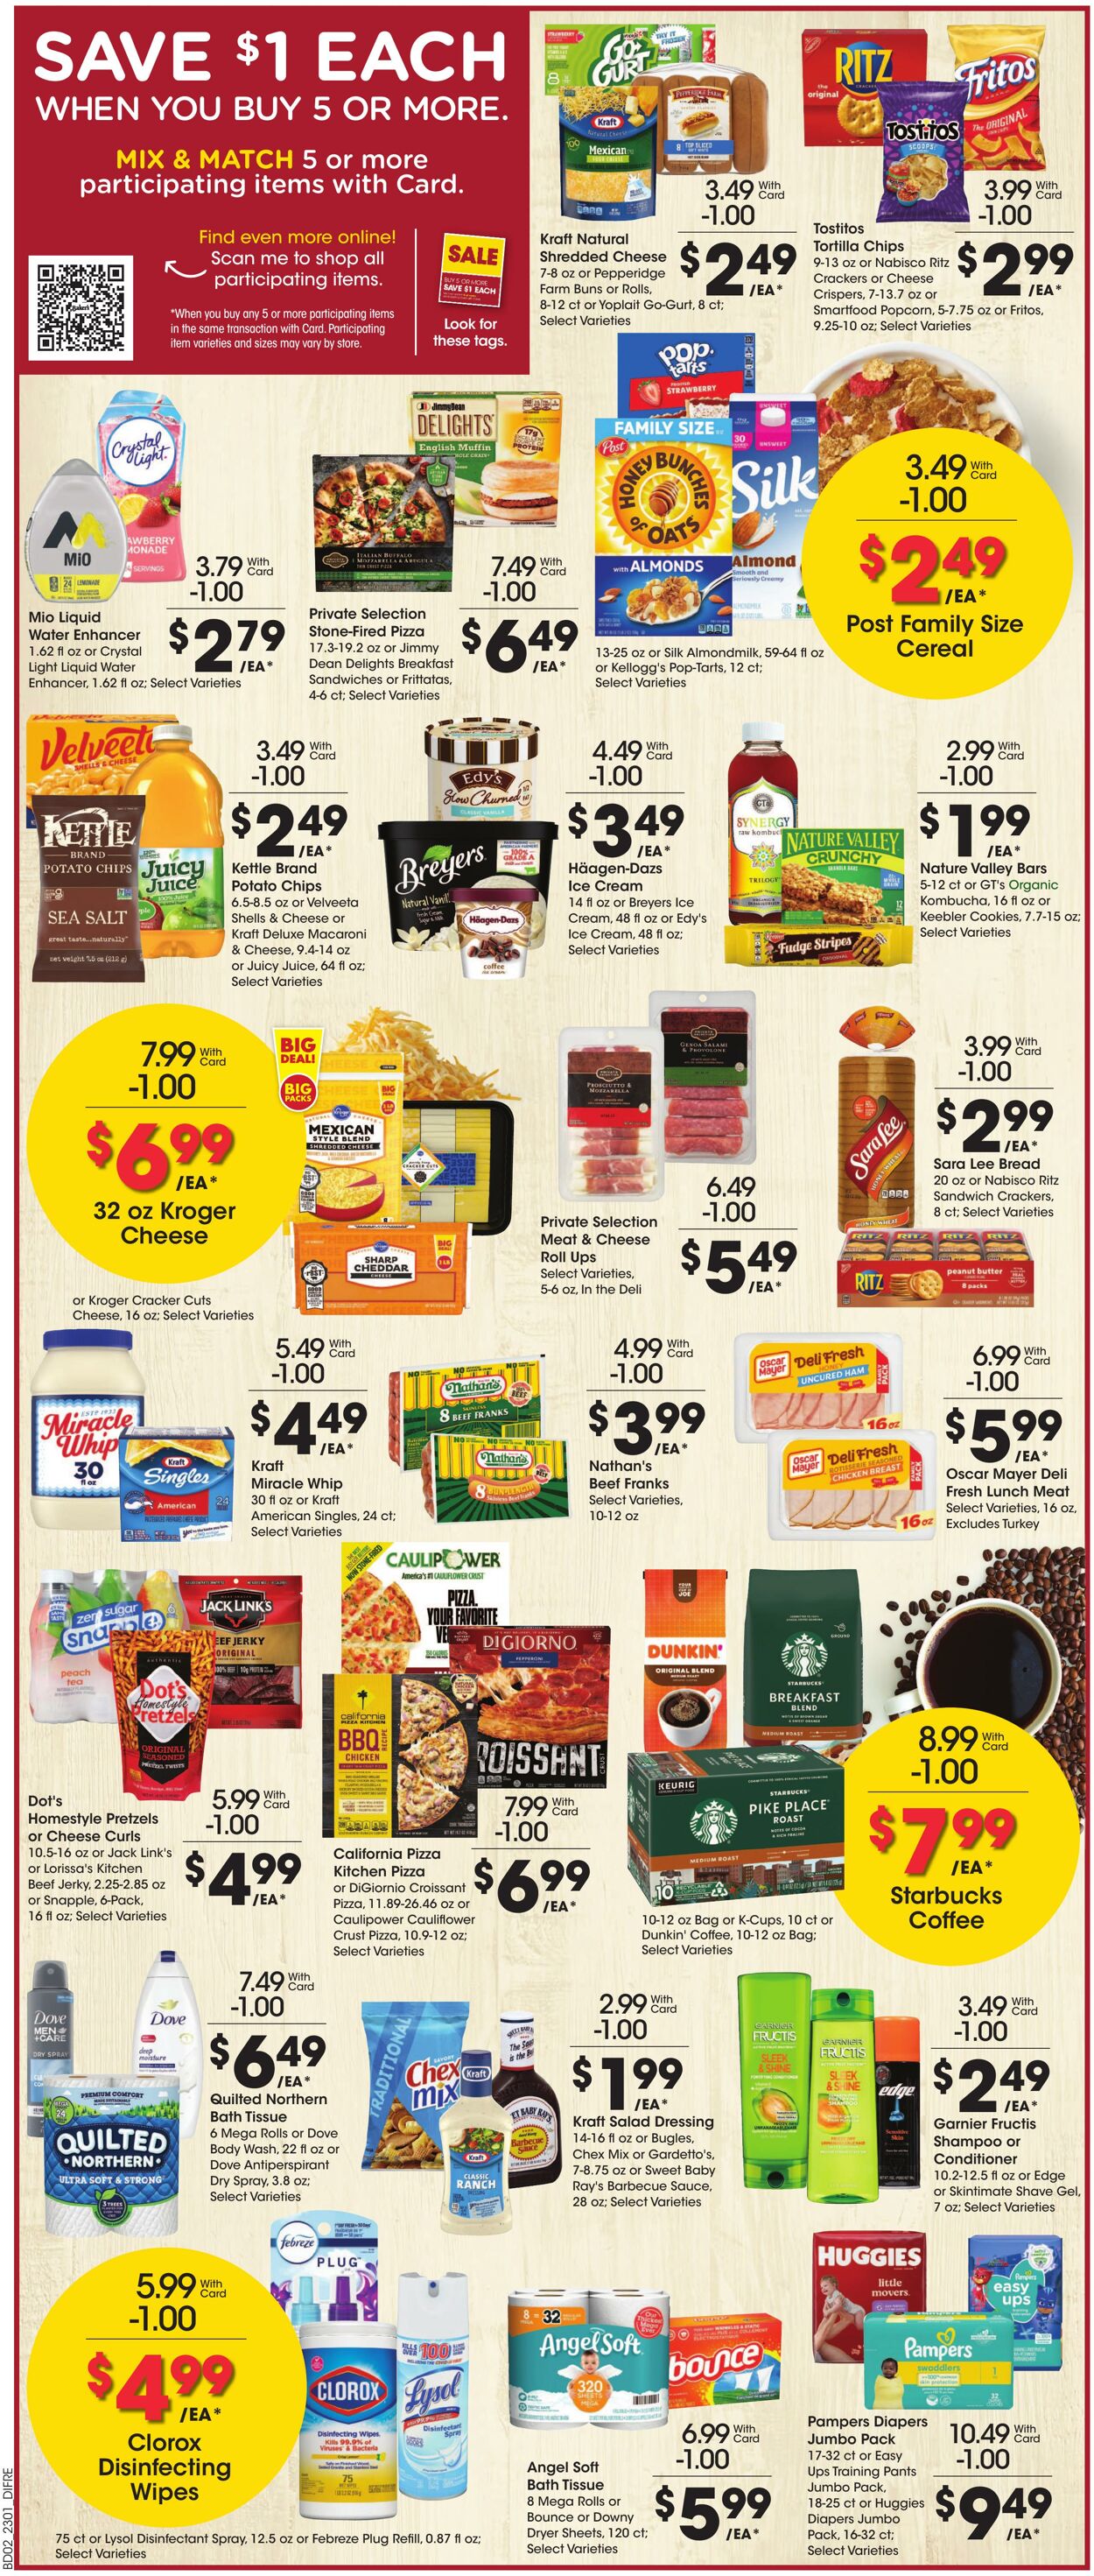 Weekly ad Baker's 02/01/2023 - 02/07/2023